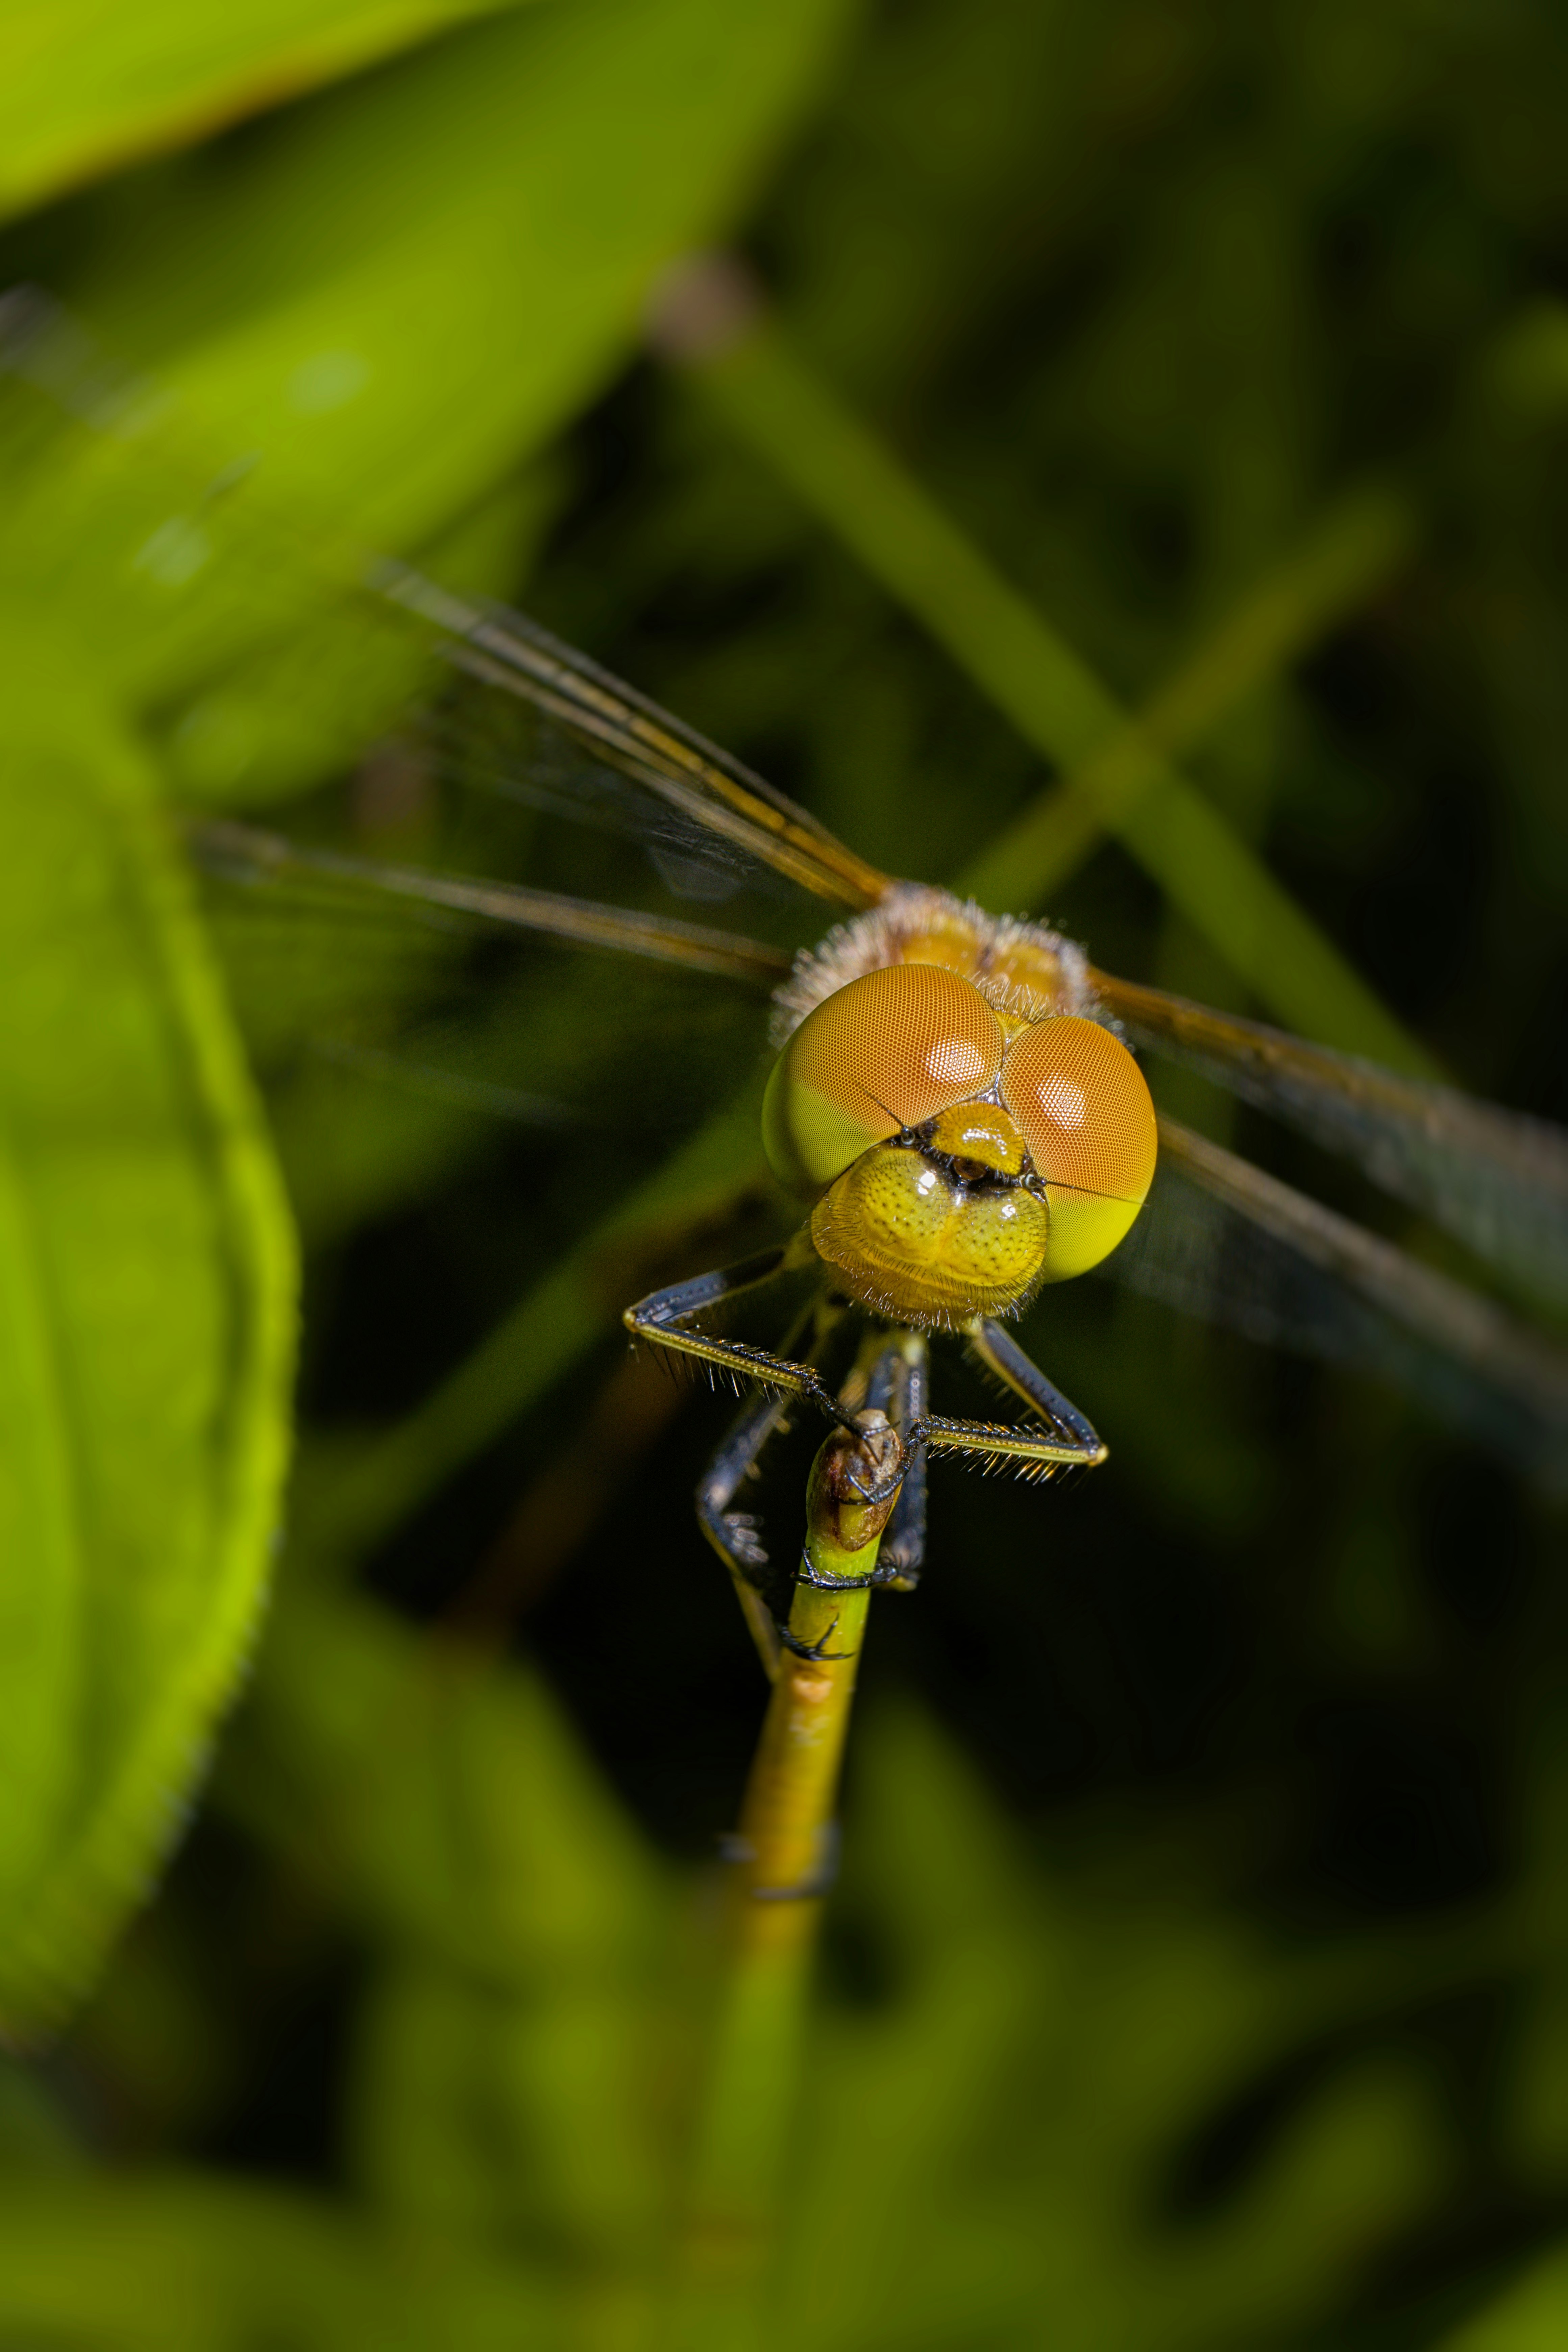 brown and green dragonfly perched on green leaf in close up photography during daytime